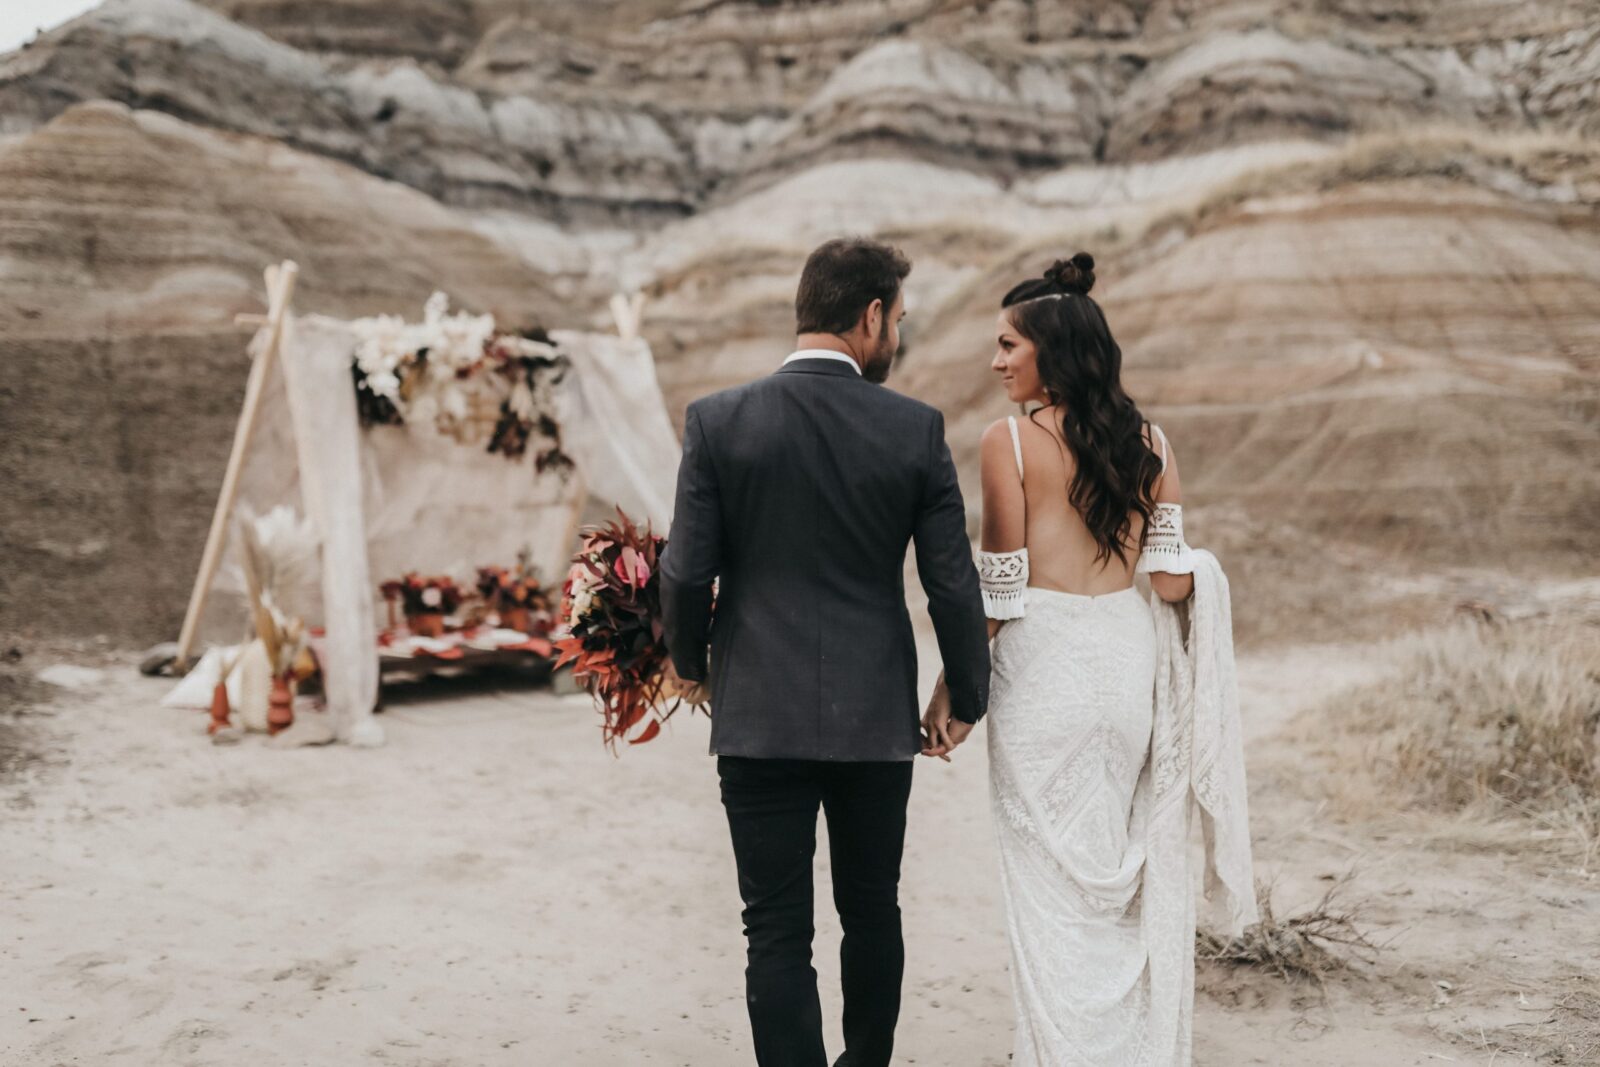 Bride and groom walk towards a boho decorated tent for this Moroccan elopement inspiration